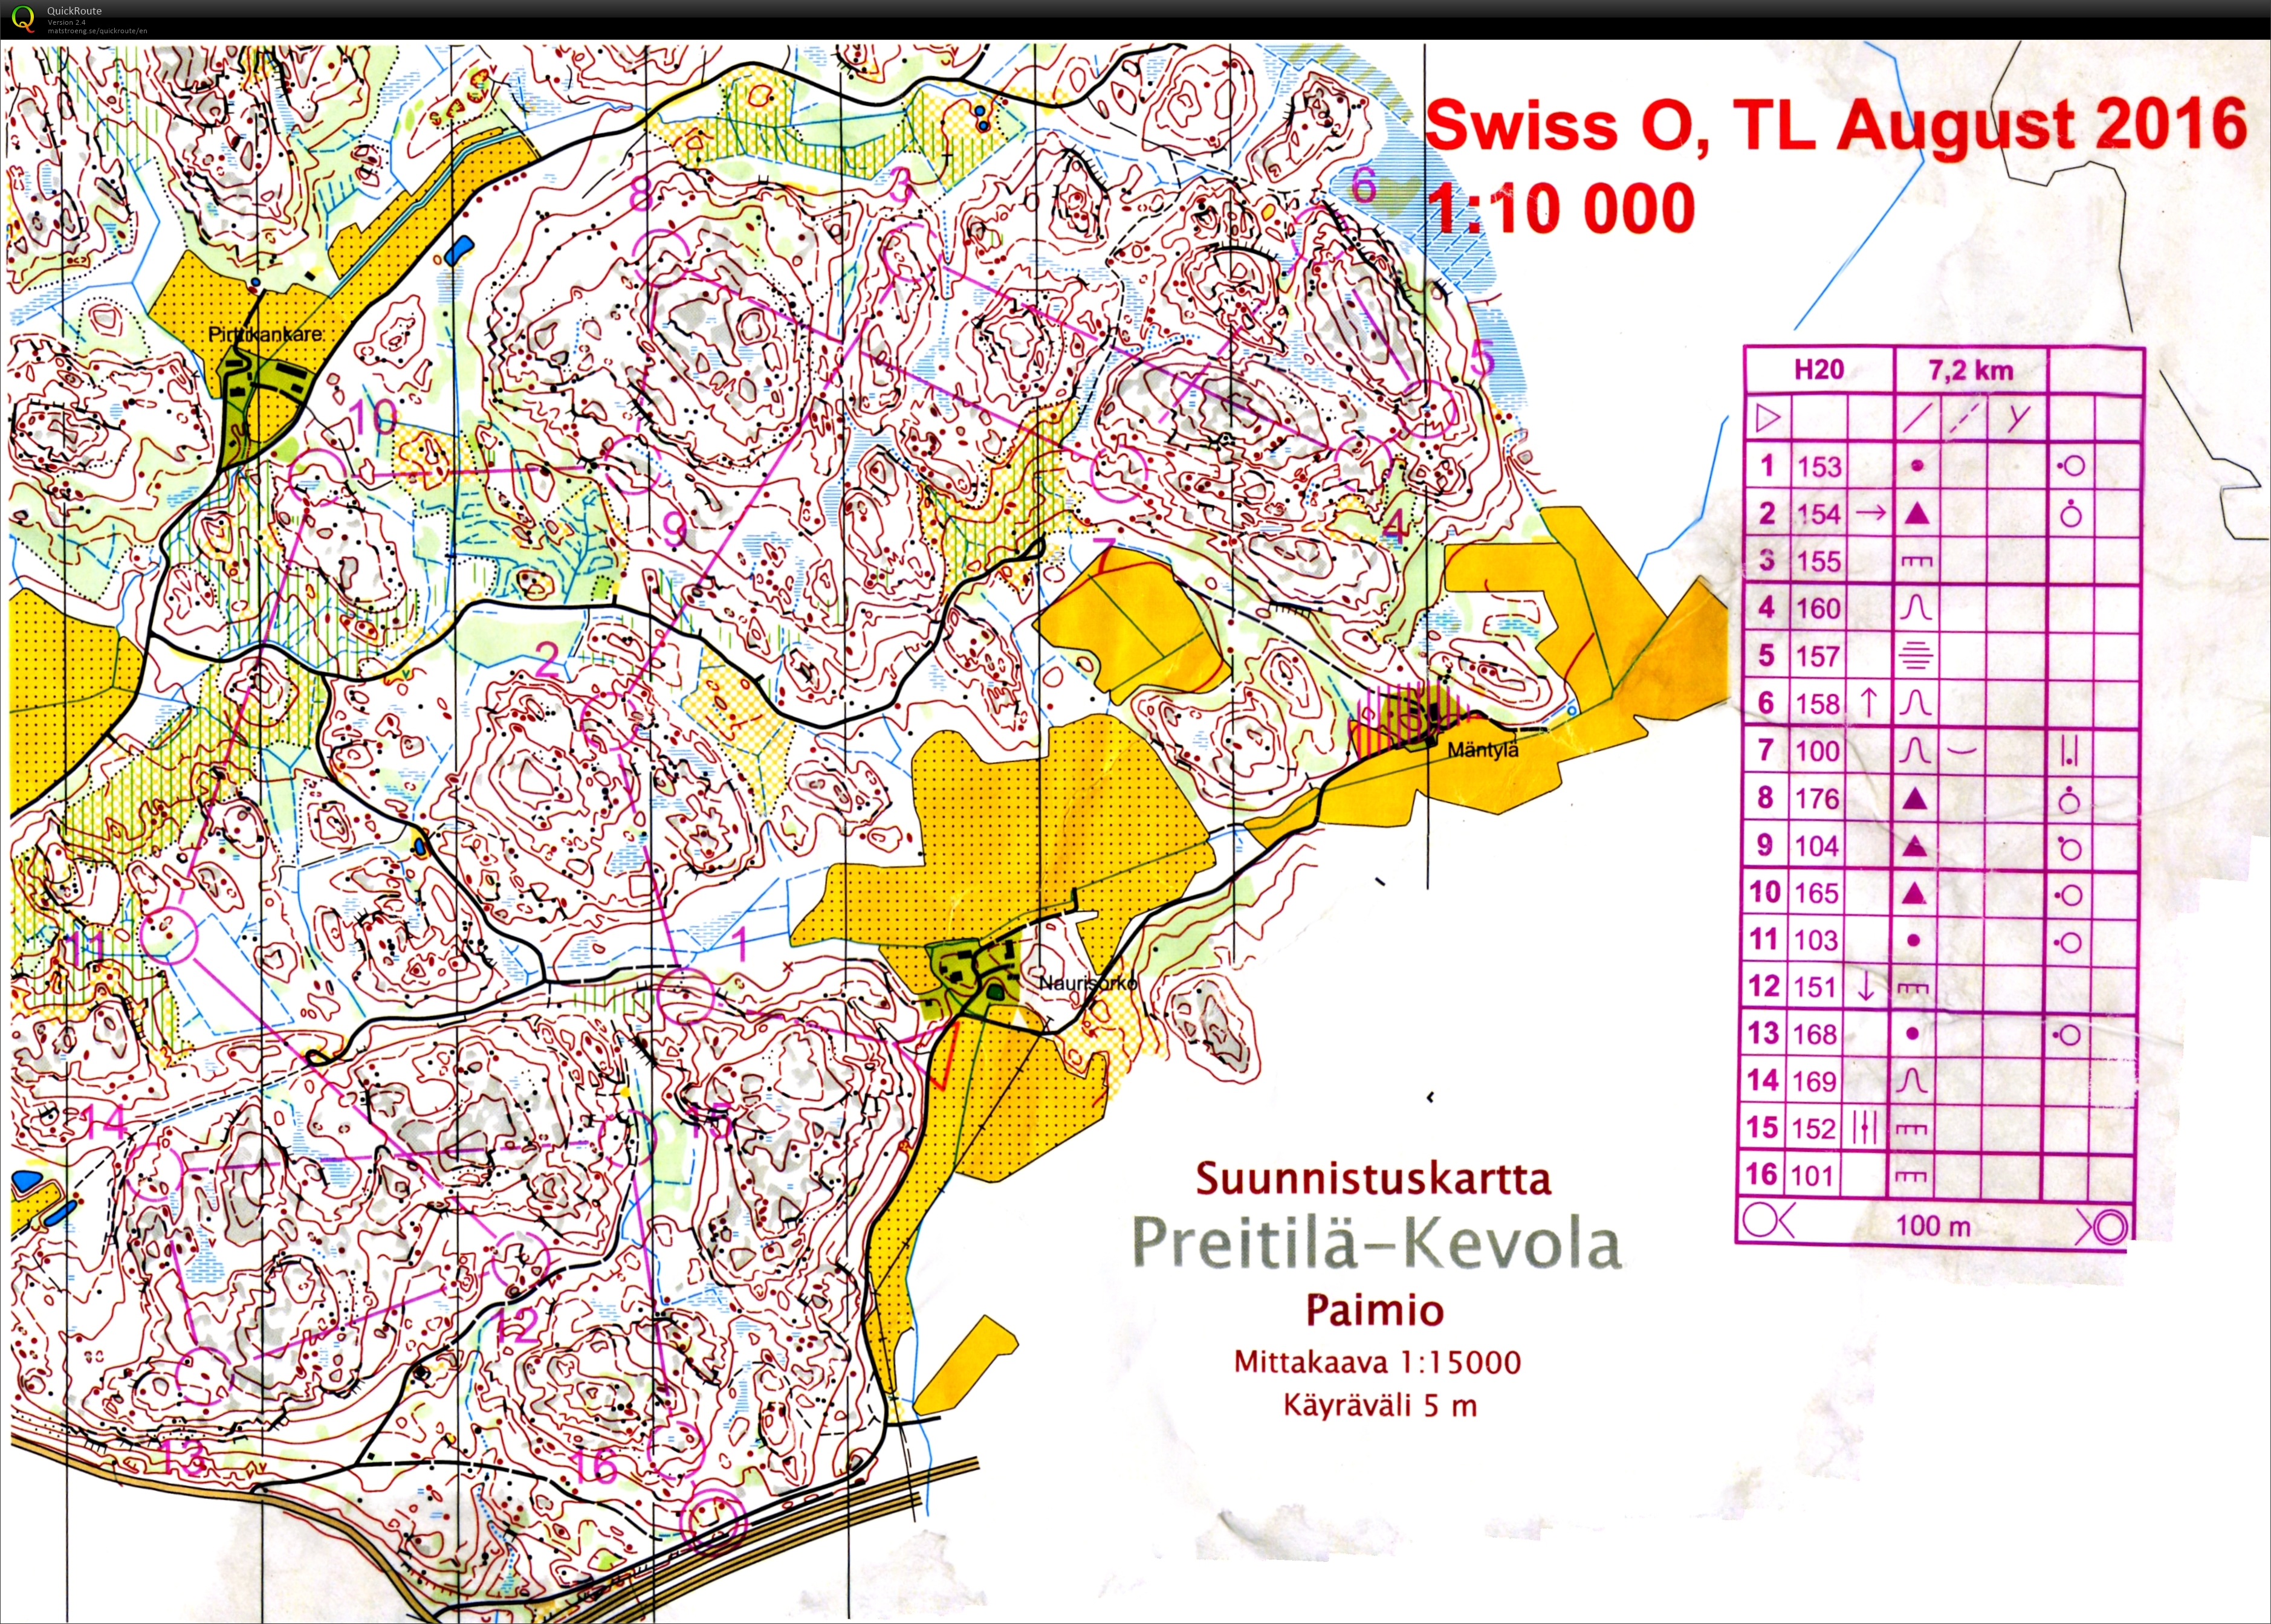 TL JWOC 2017 T7 Attackpoint (04-08-2016)